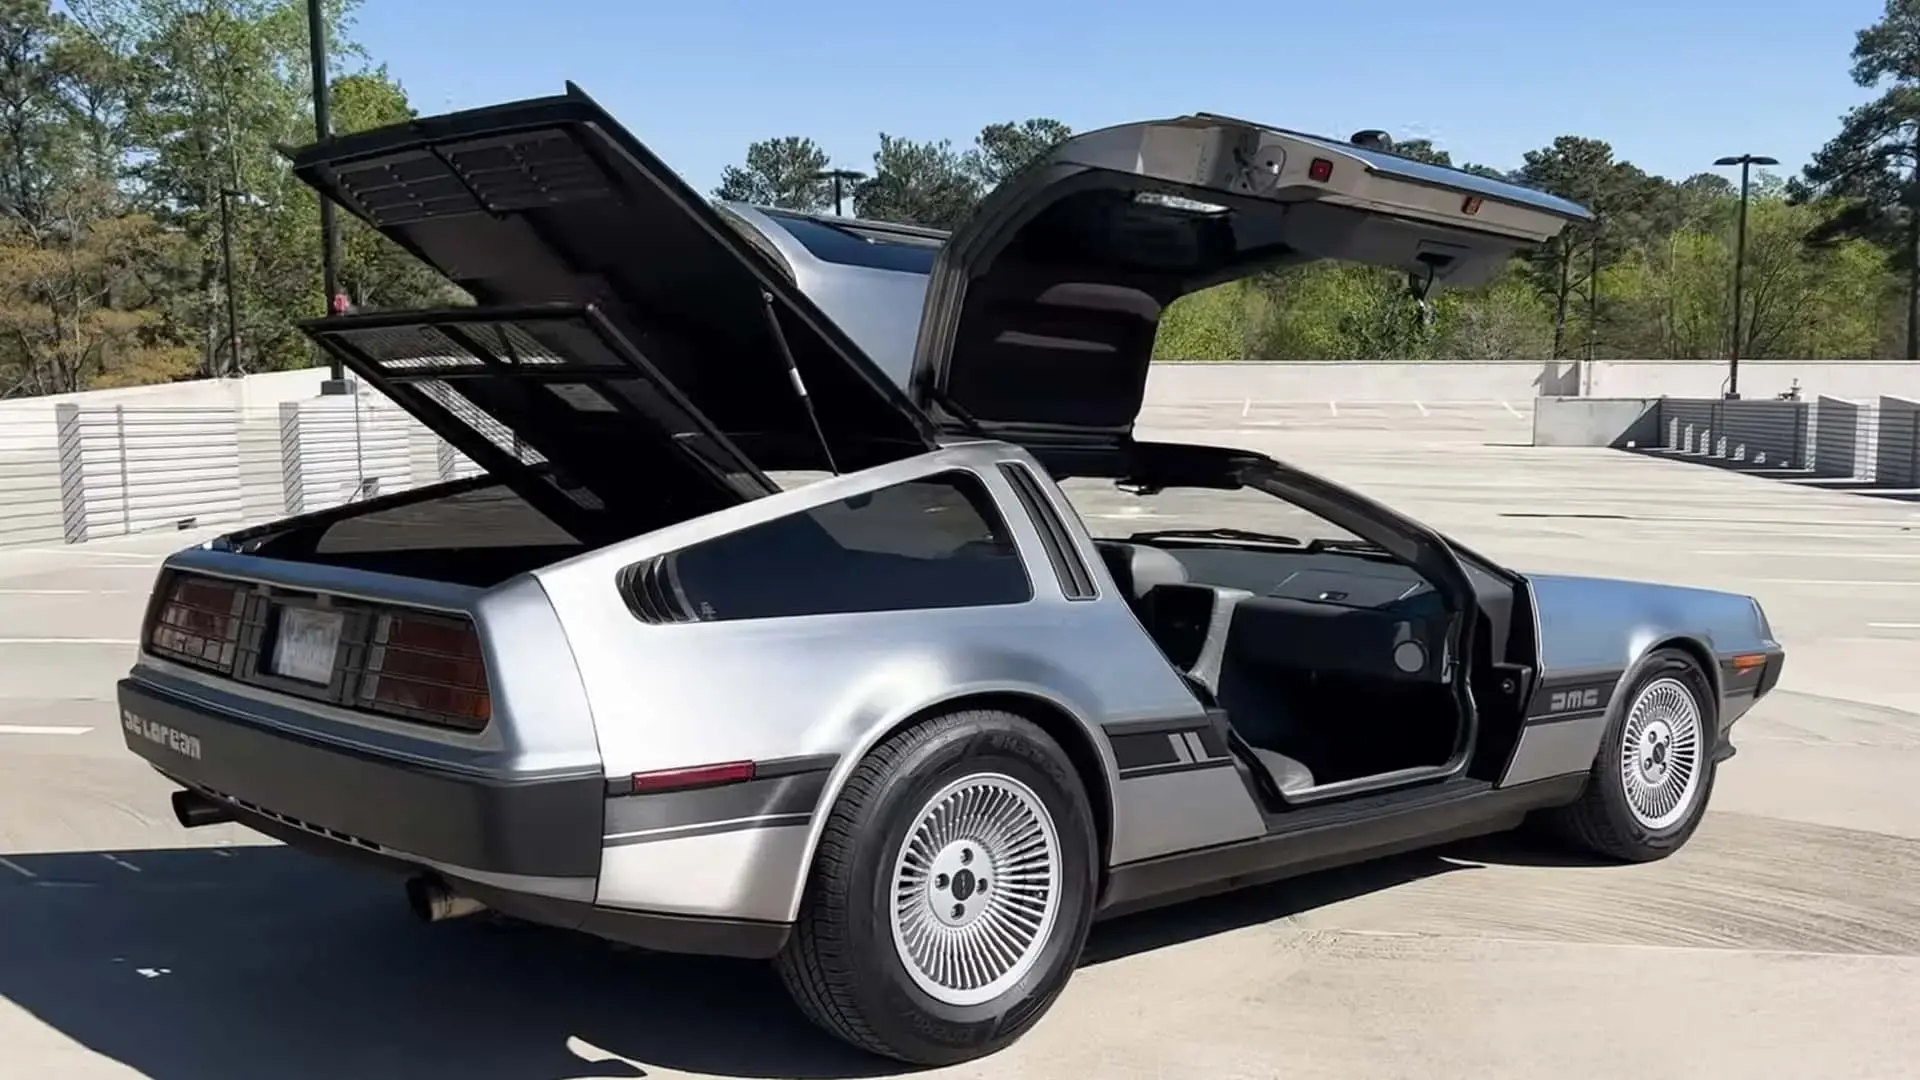 The delorean s most significant issue is resolved by the installation of a high performance honda engine 2